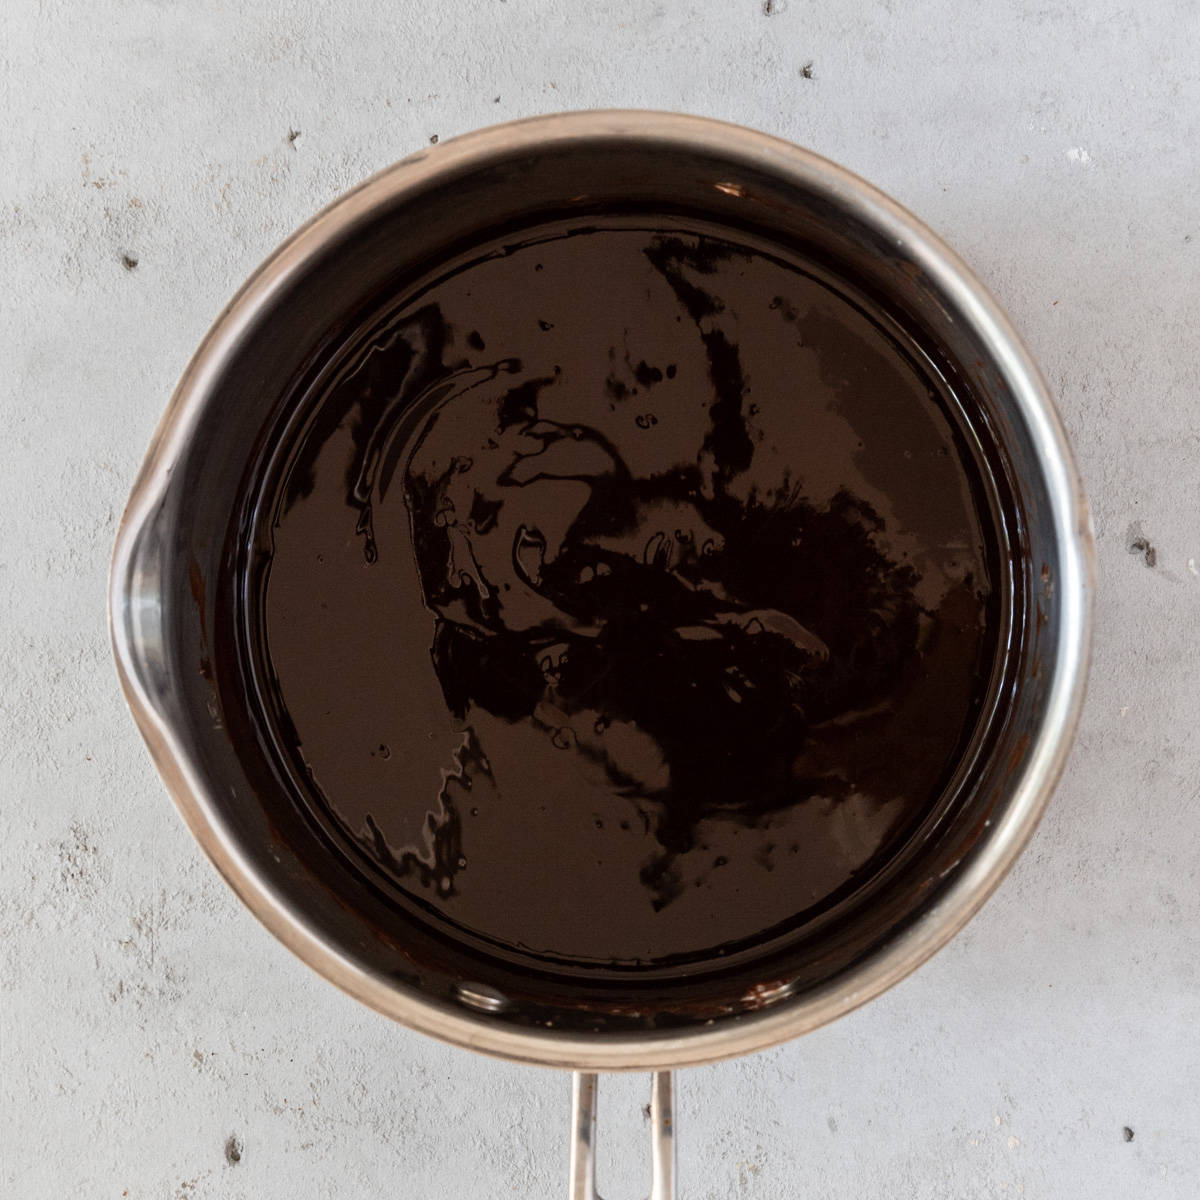 the butter and chocolate melted down in a saucepan on a grey background.